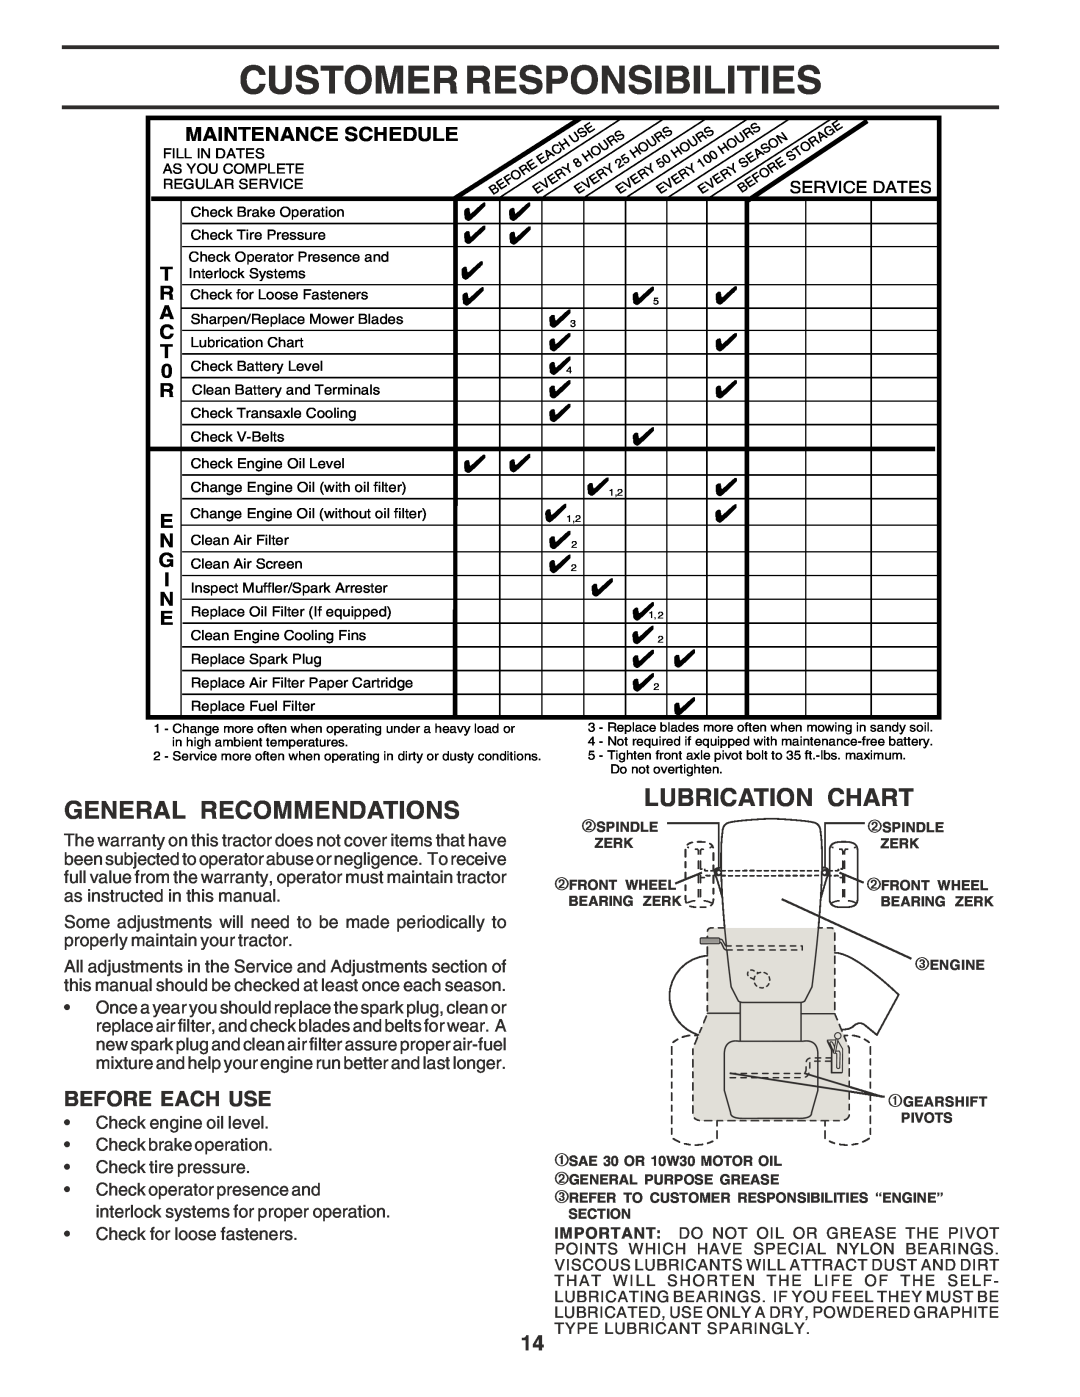 Poulan PR17542STA owner manual Customer Responsibilities, General Recommendations, Lubrication Chart, Before Each Use 